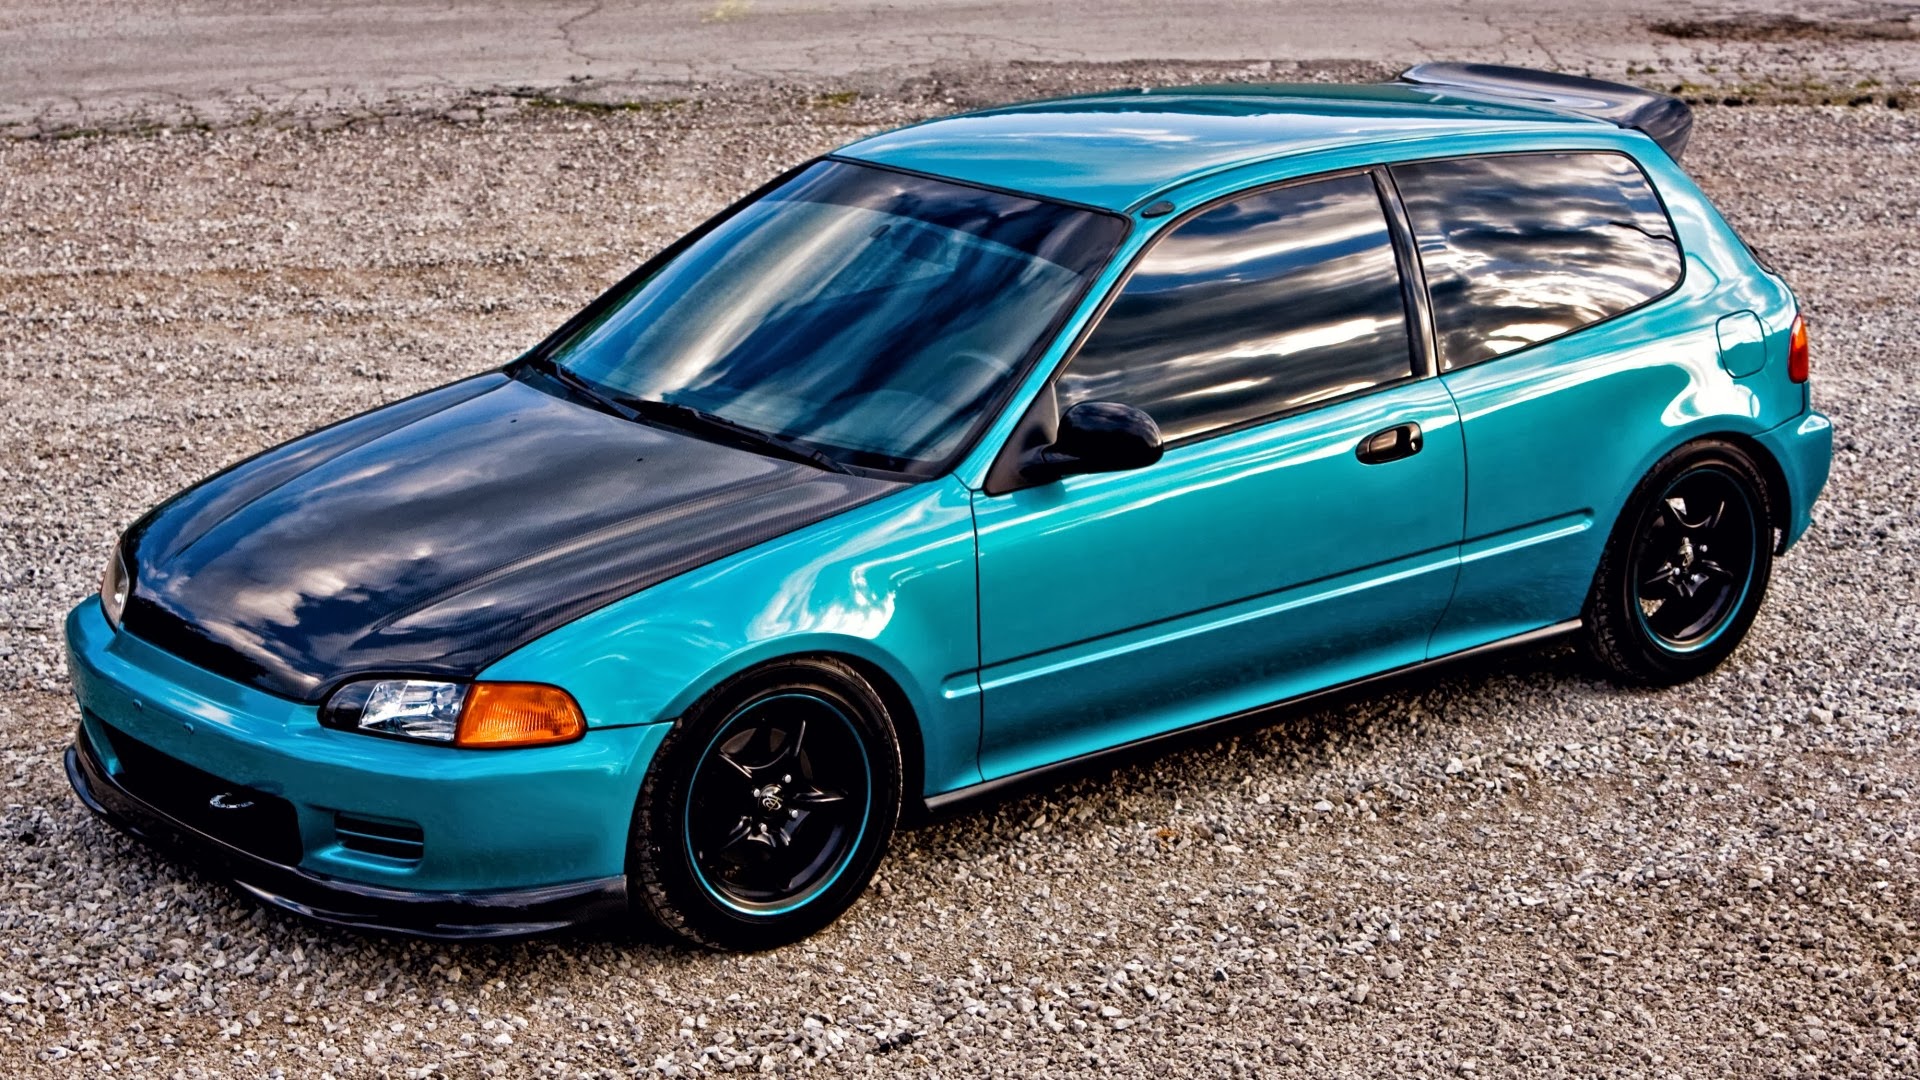 this images of wallpapers machine honda civic eg modified wallpaper